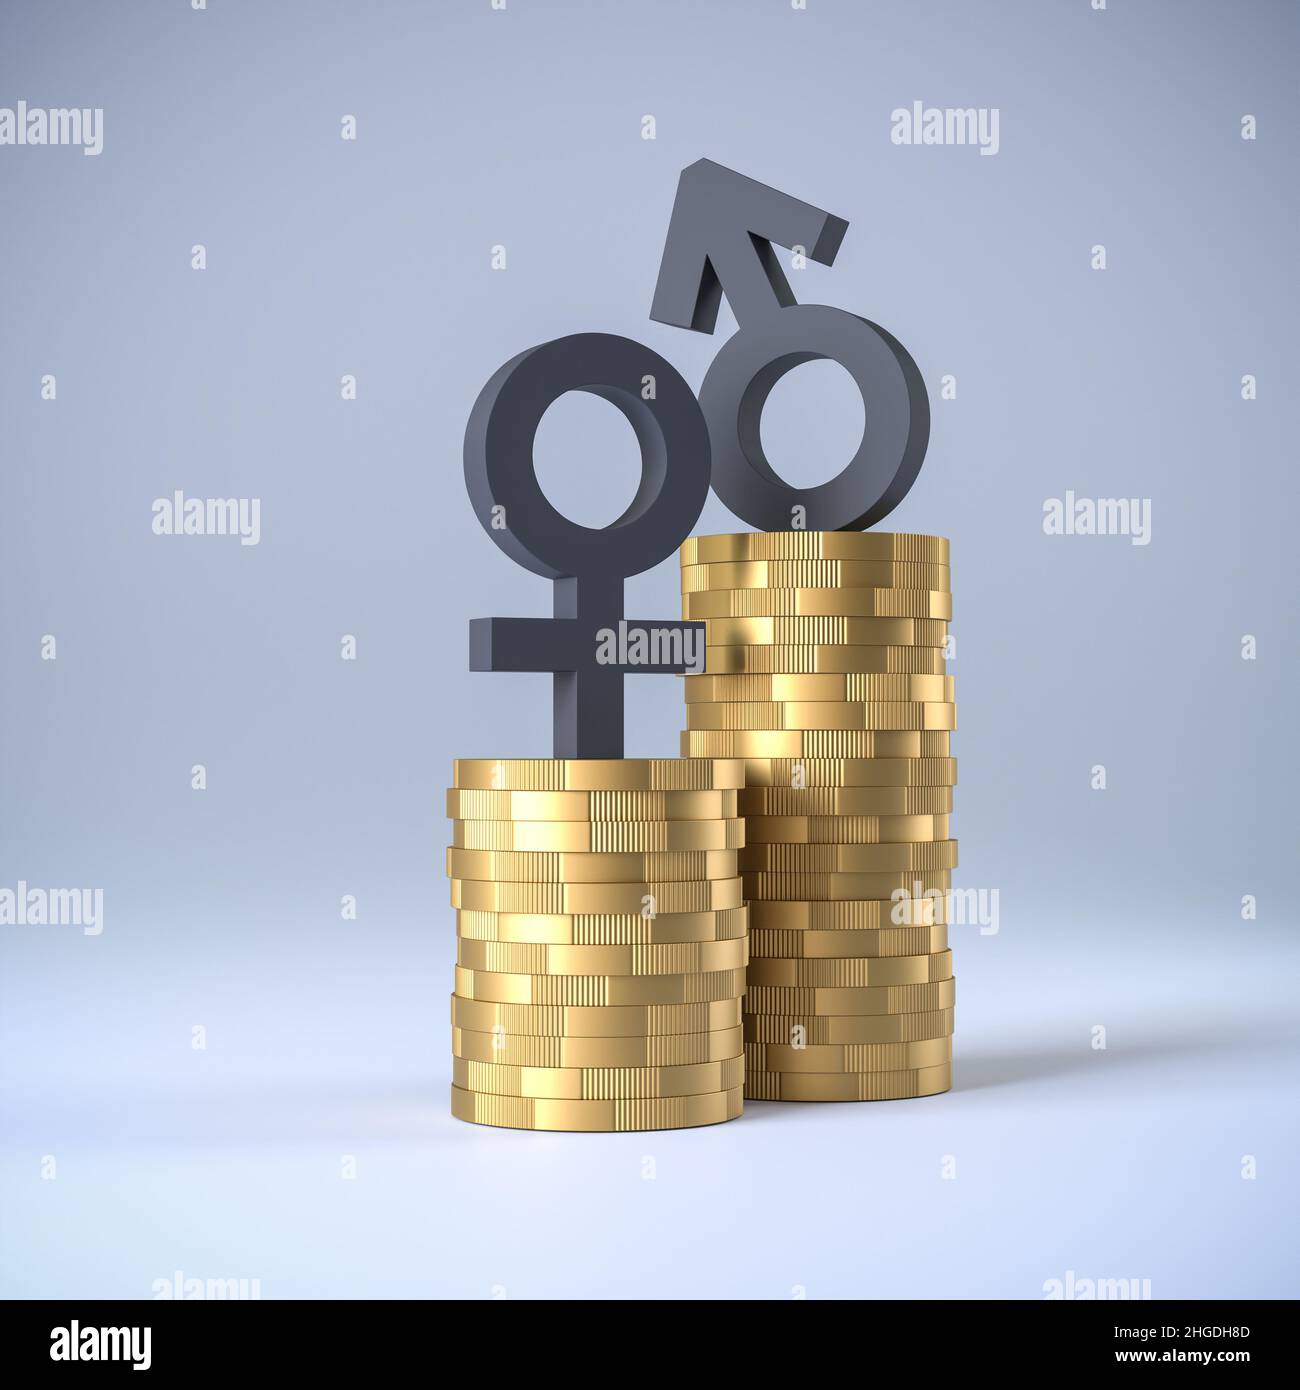 Gender pay gap concept: Two heaps of coins with different height and male and female symbols on top. Stock Photo